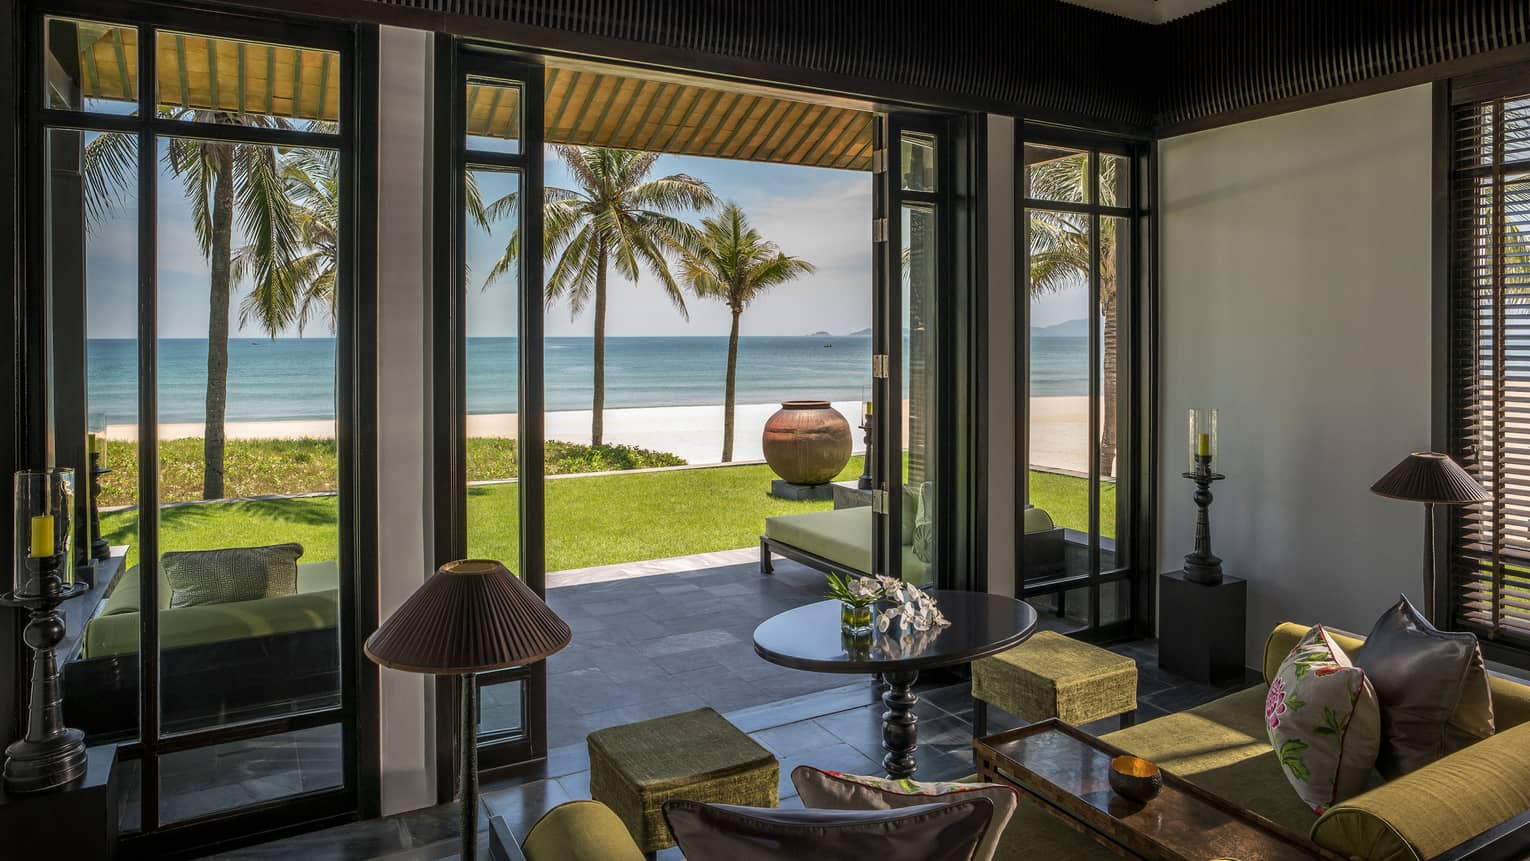 Beachfront Villa living room with open walls to lawn, palm trees, beach, ocean